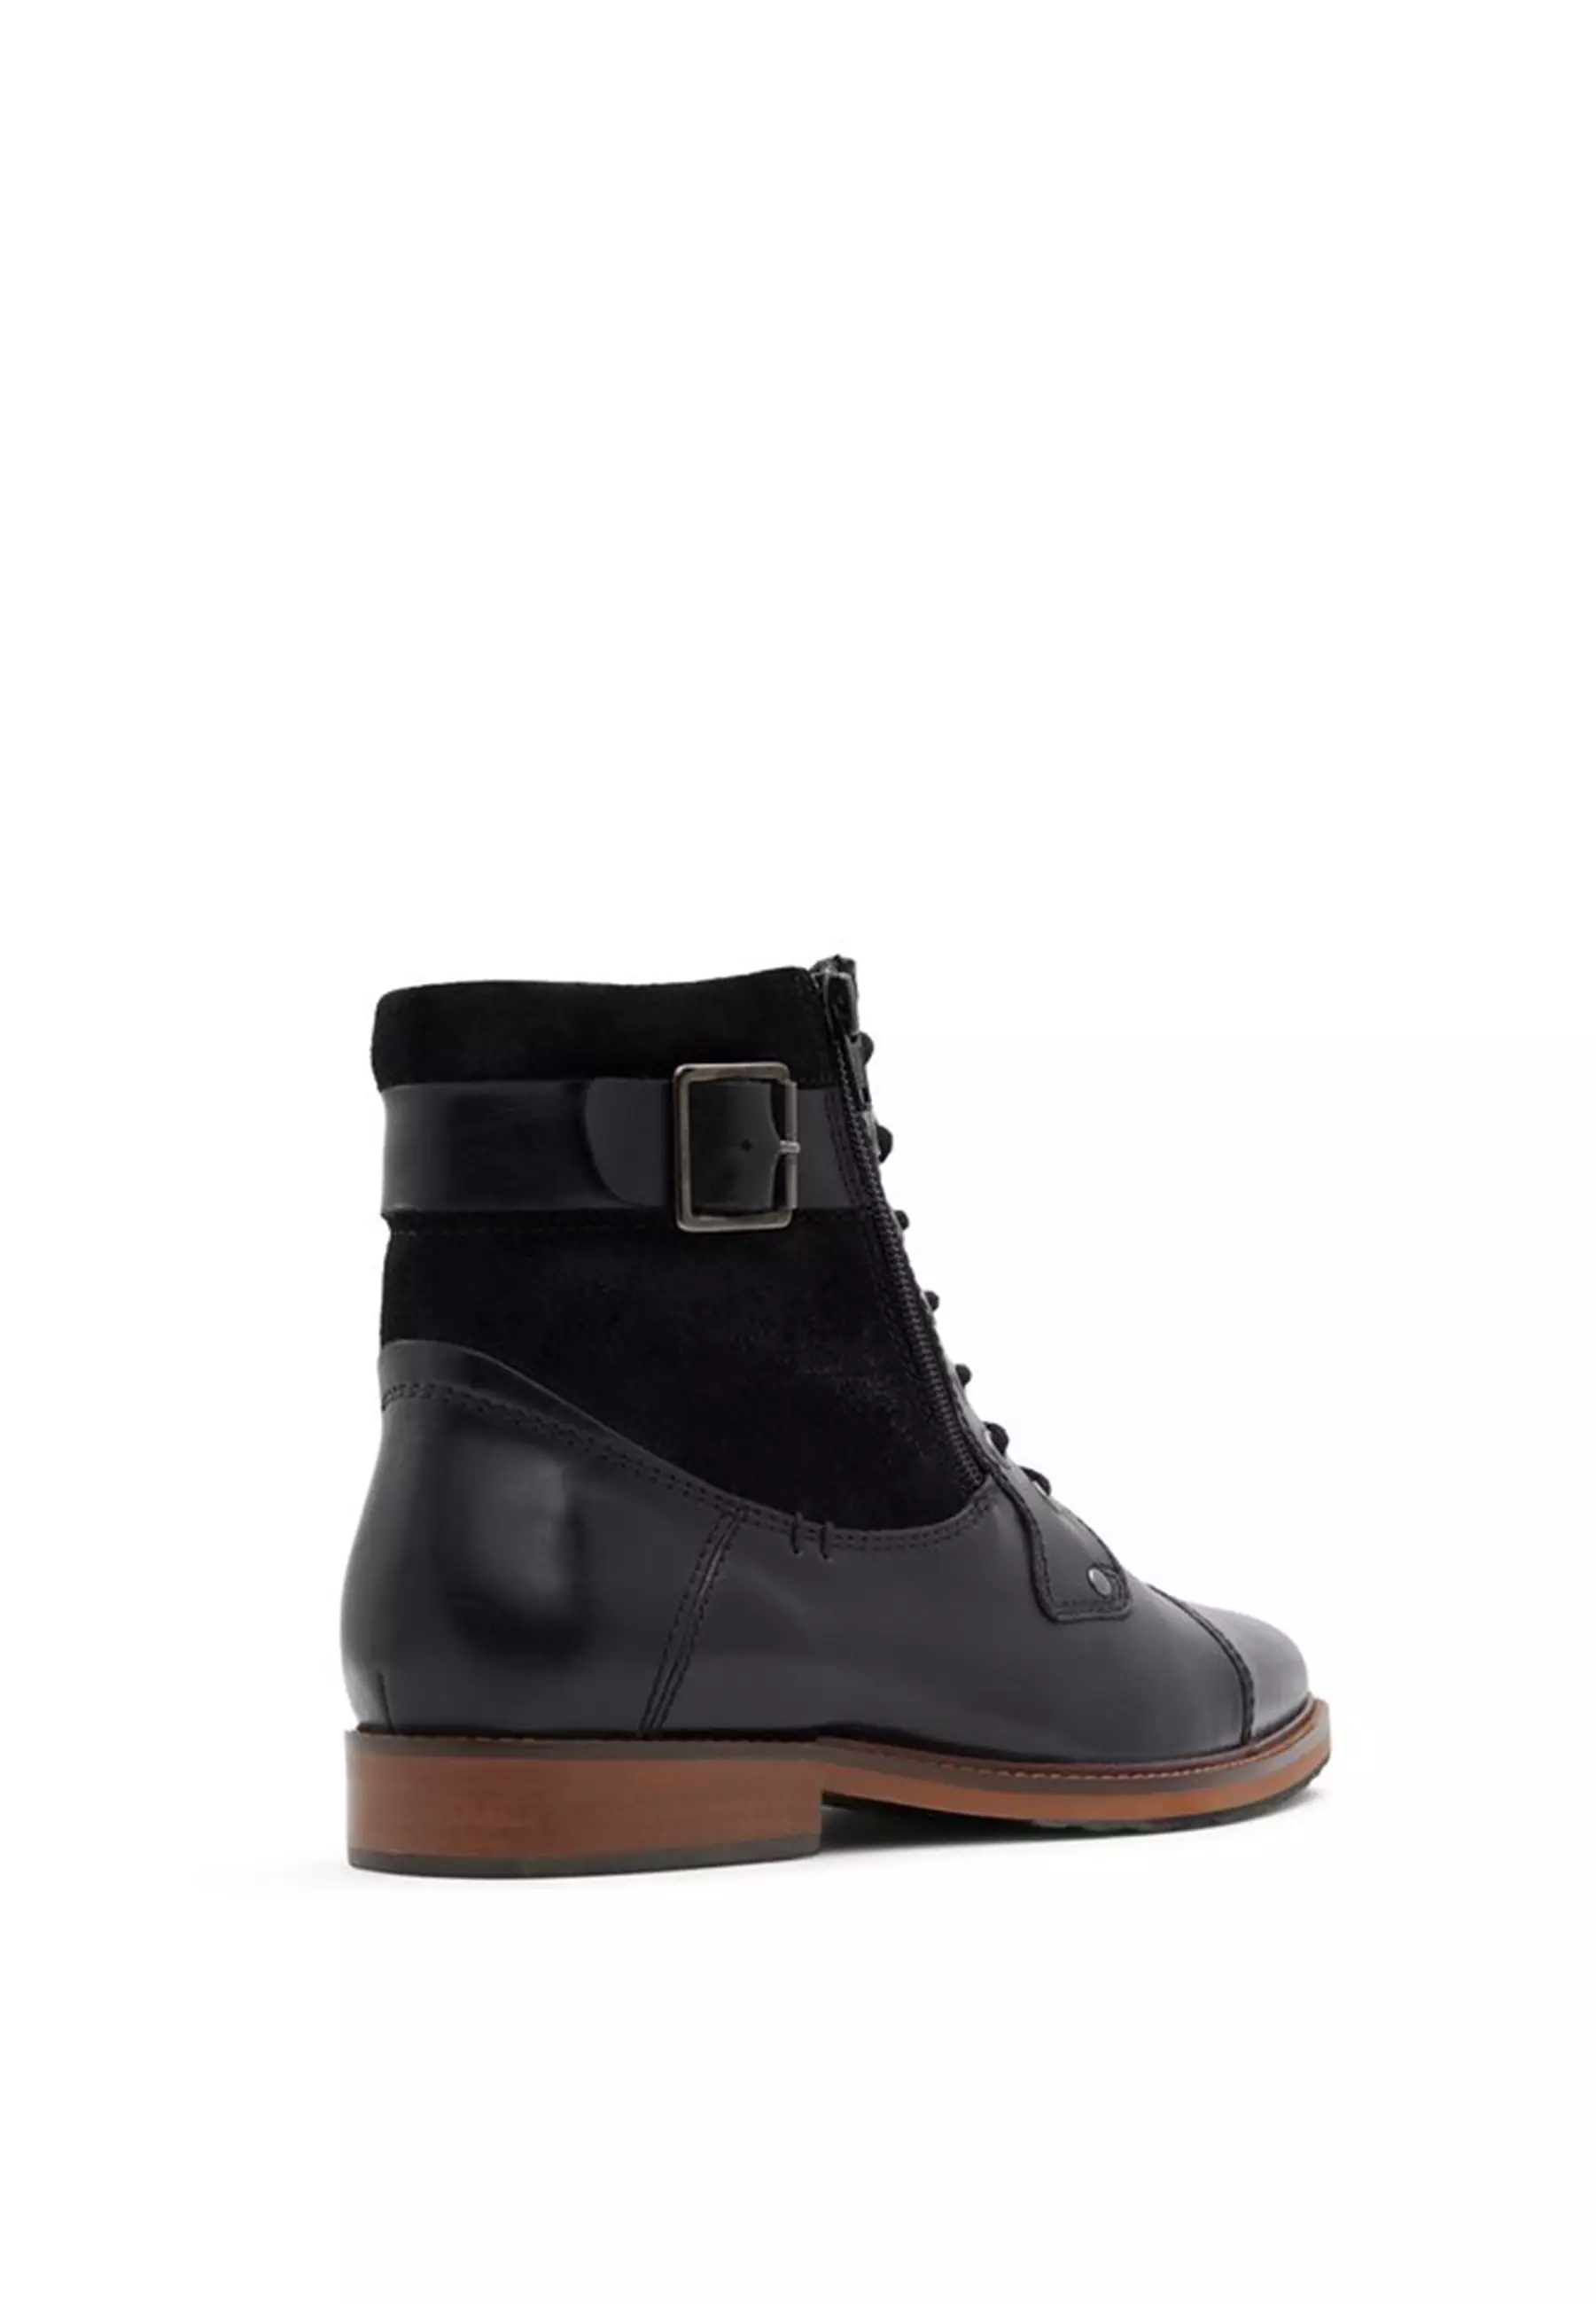 Buy ALDO Constantine Lace Up Ankle Boots Online | ZALORA Malaysia